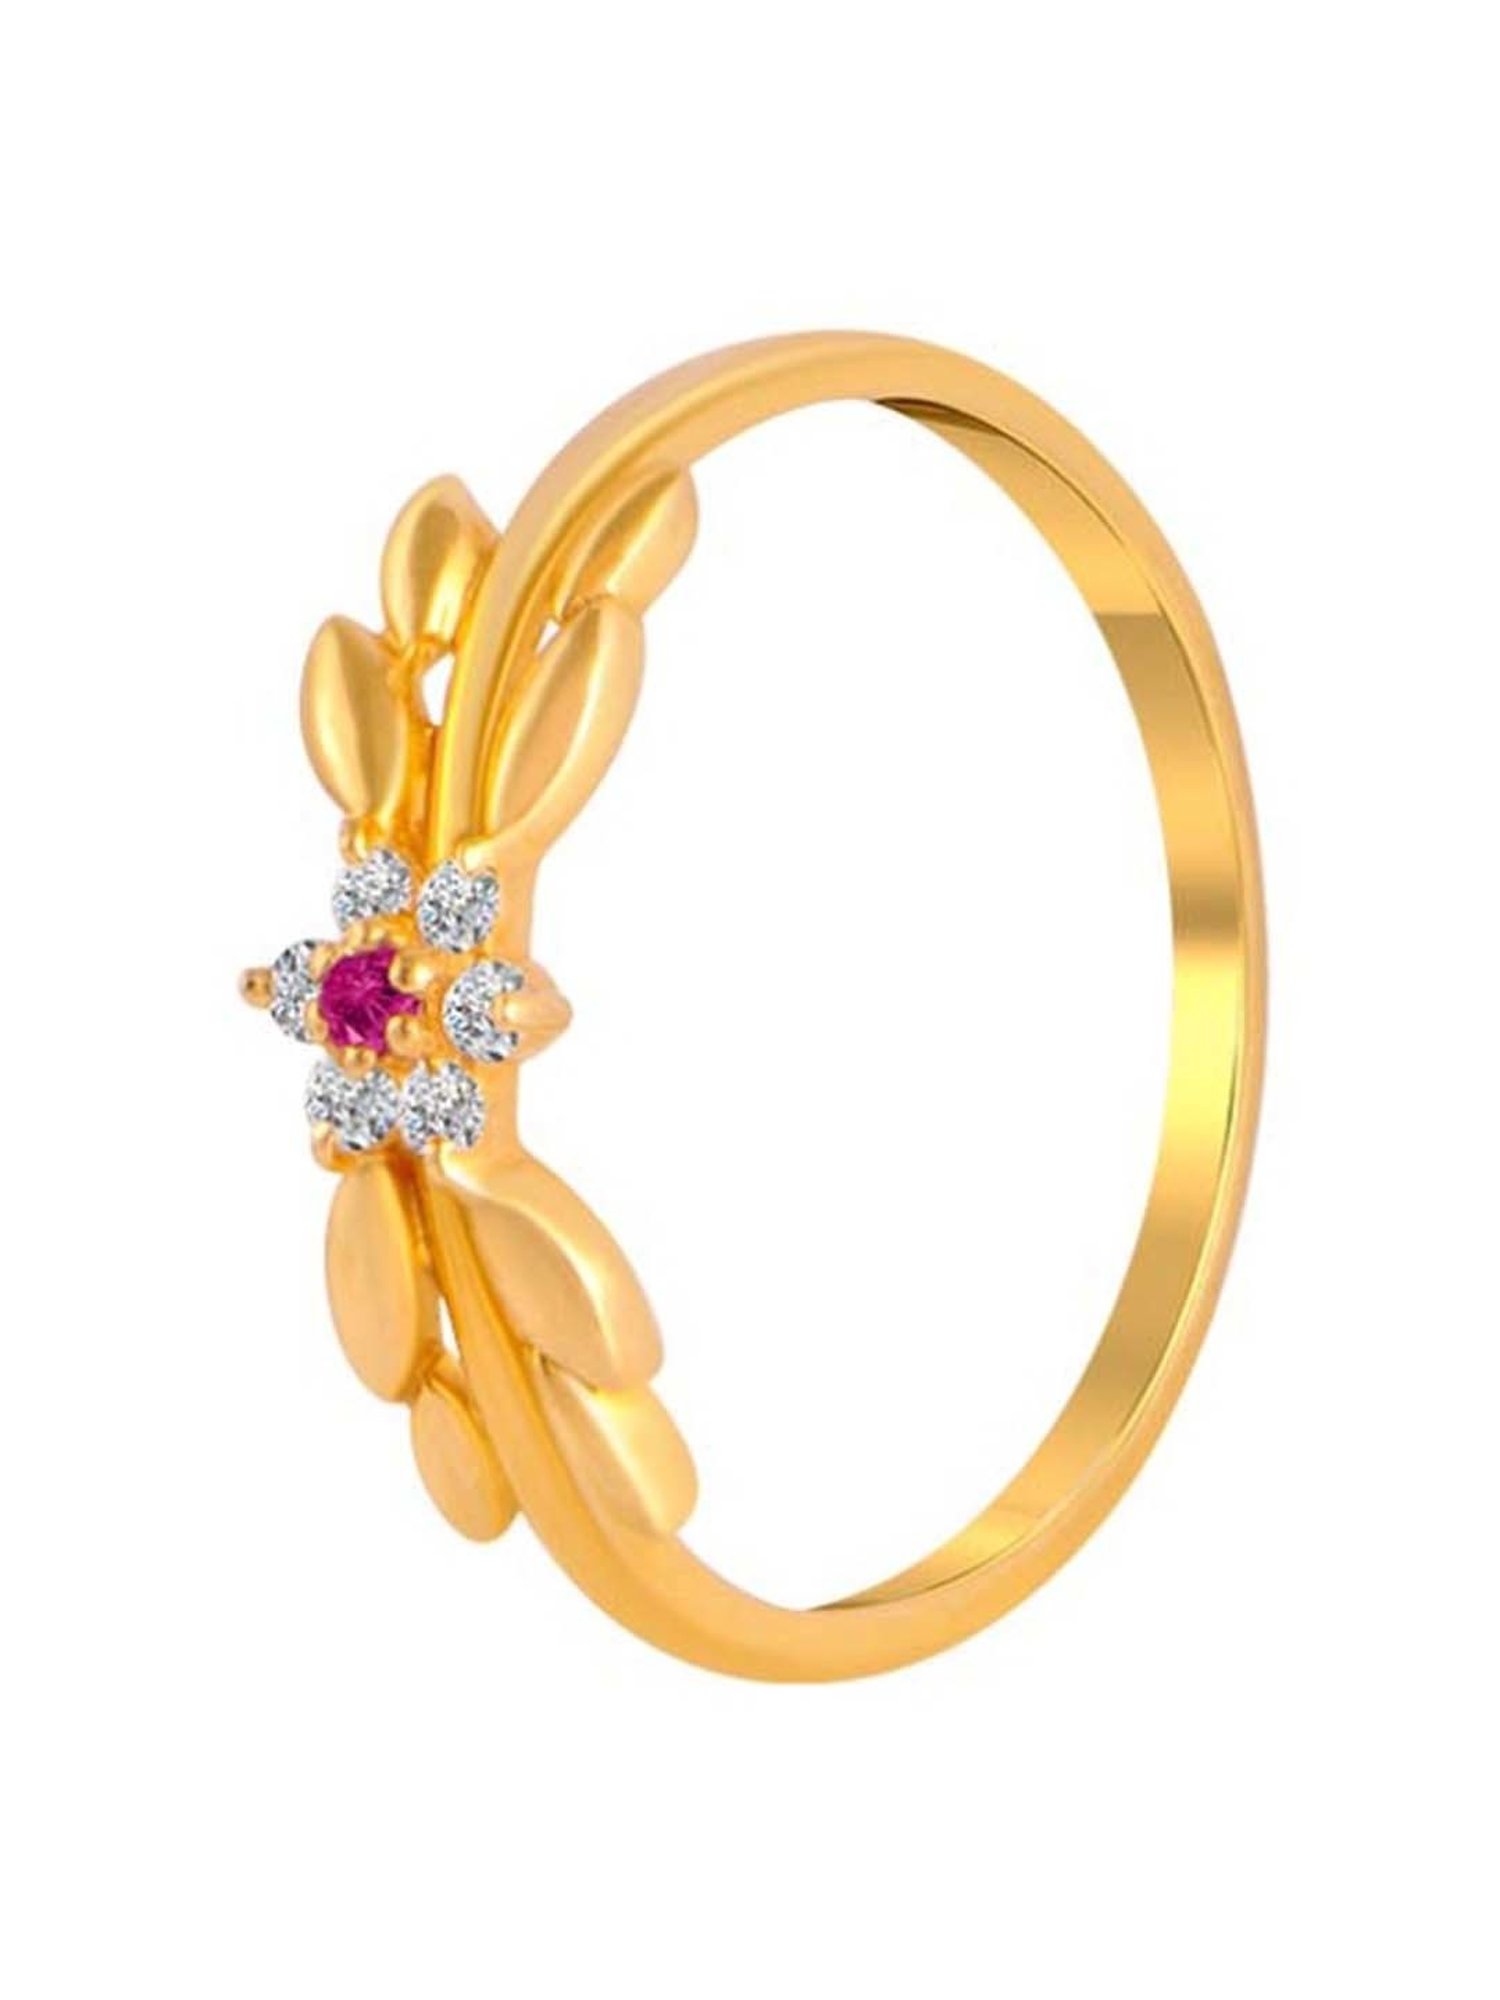 Latest Gold Rings Designs for Women | PC Chandra Jewellers